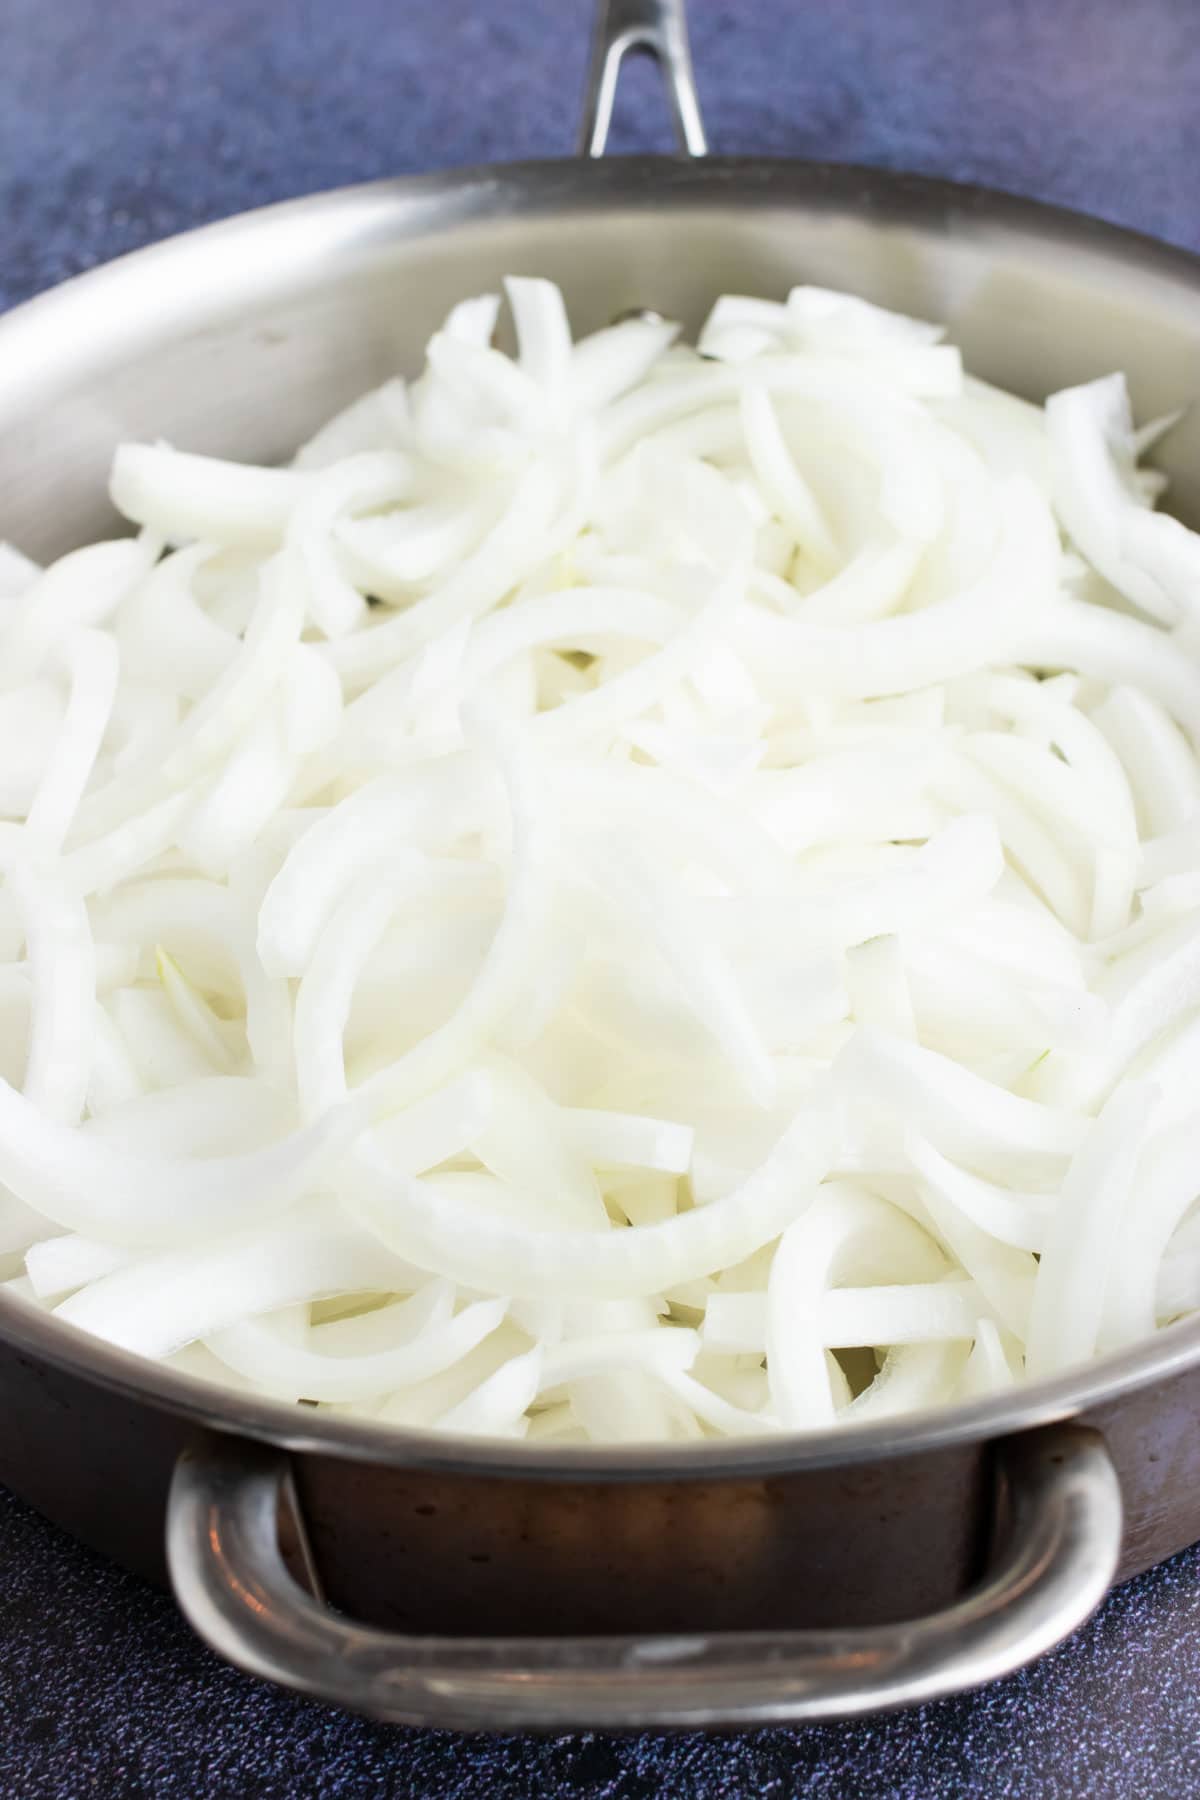 An image showing sliced onions being added to a stainless steel pan.